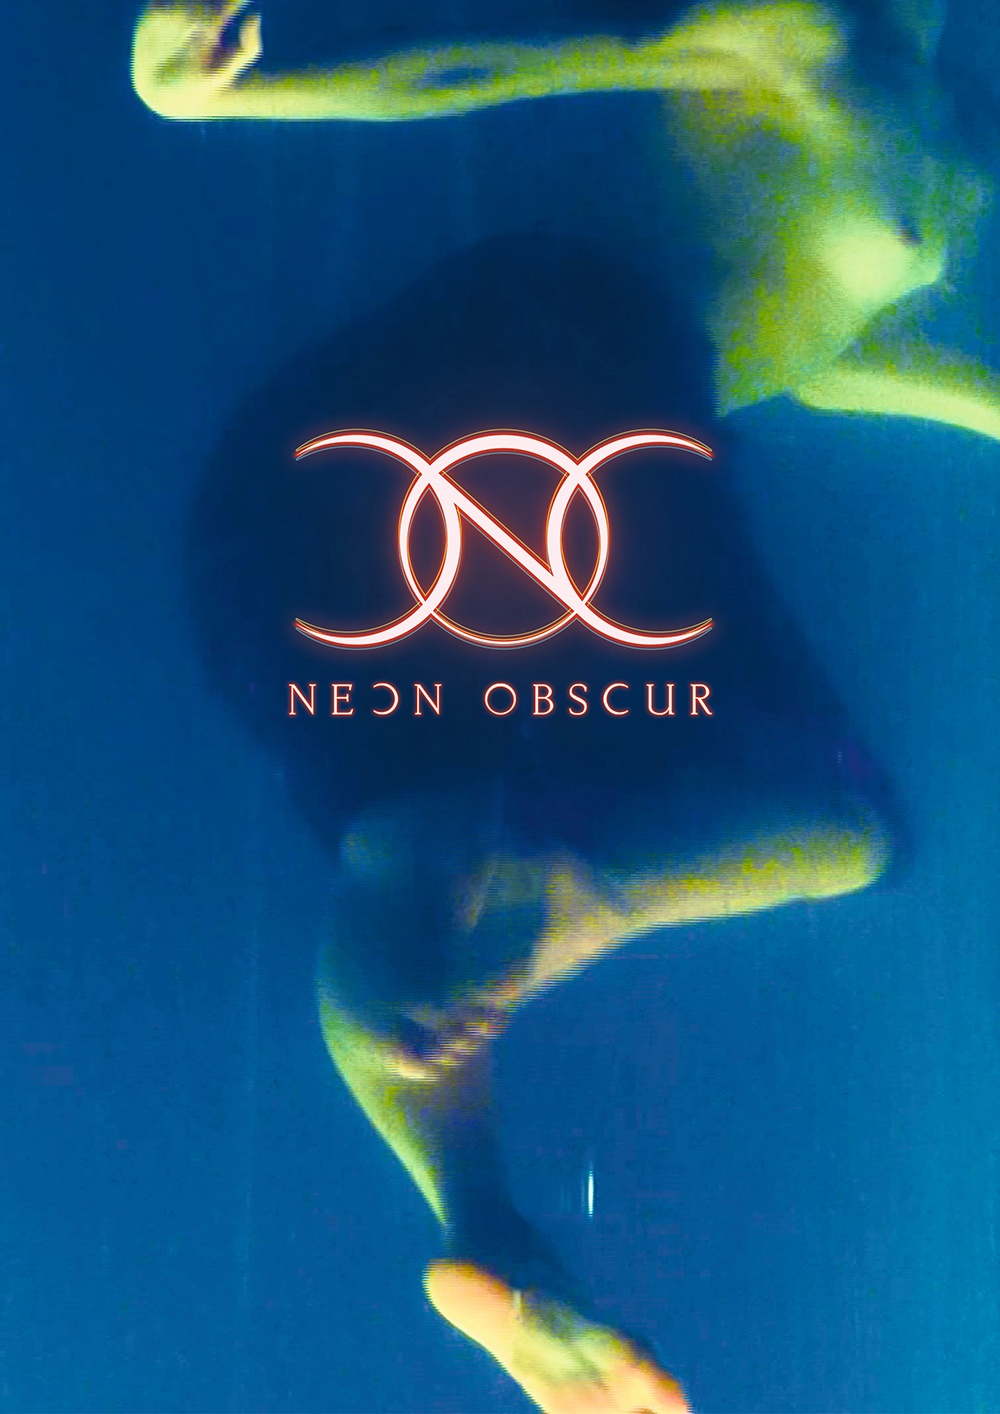 02_3615_neon_obscur_01